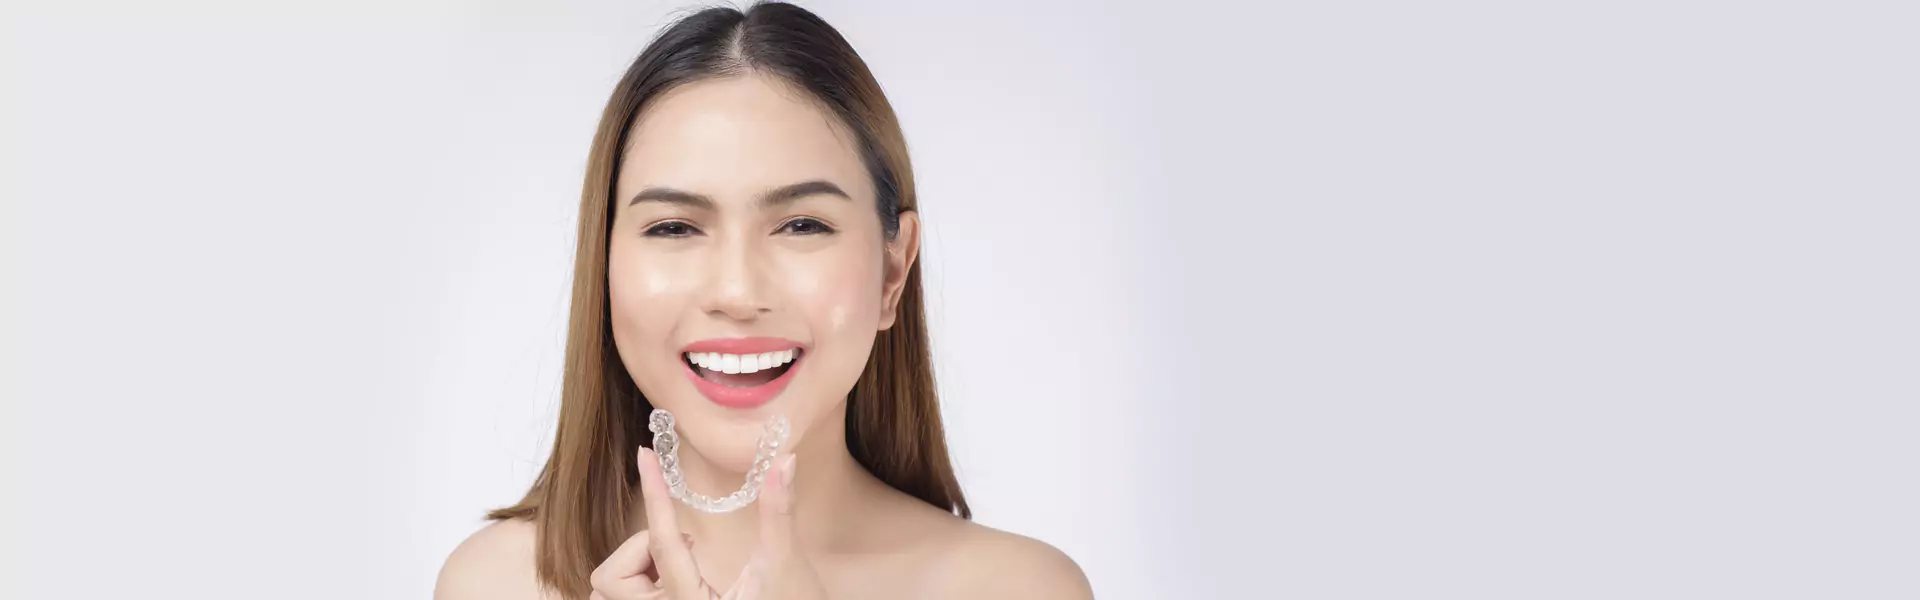 Invisalign: The Clear Solution for Braces